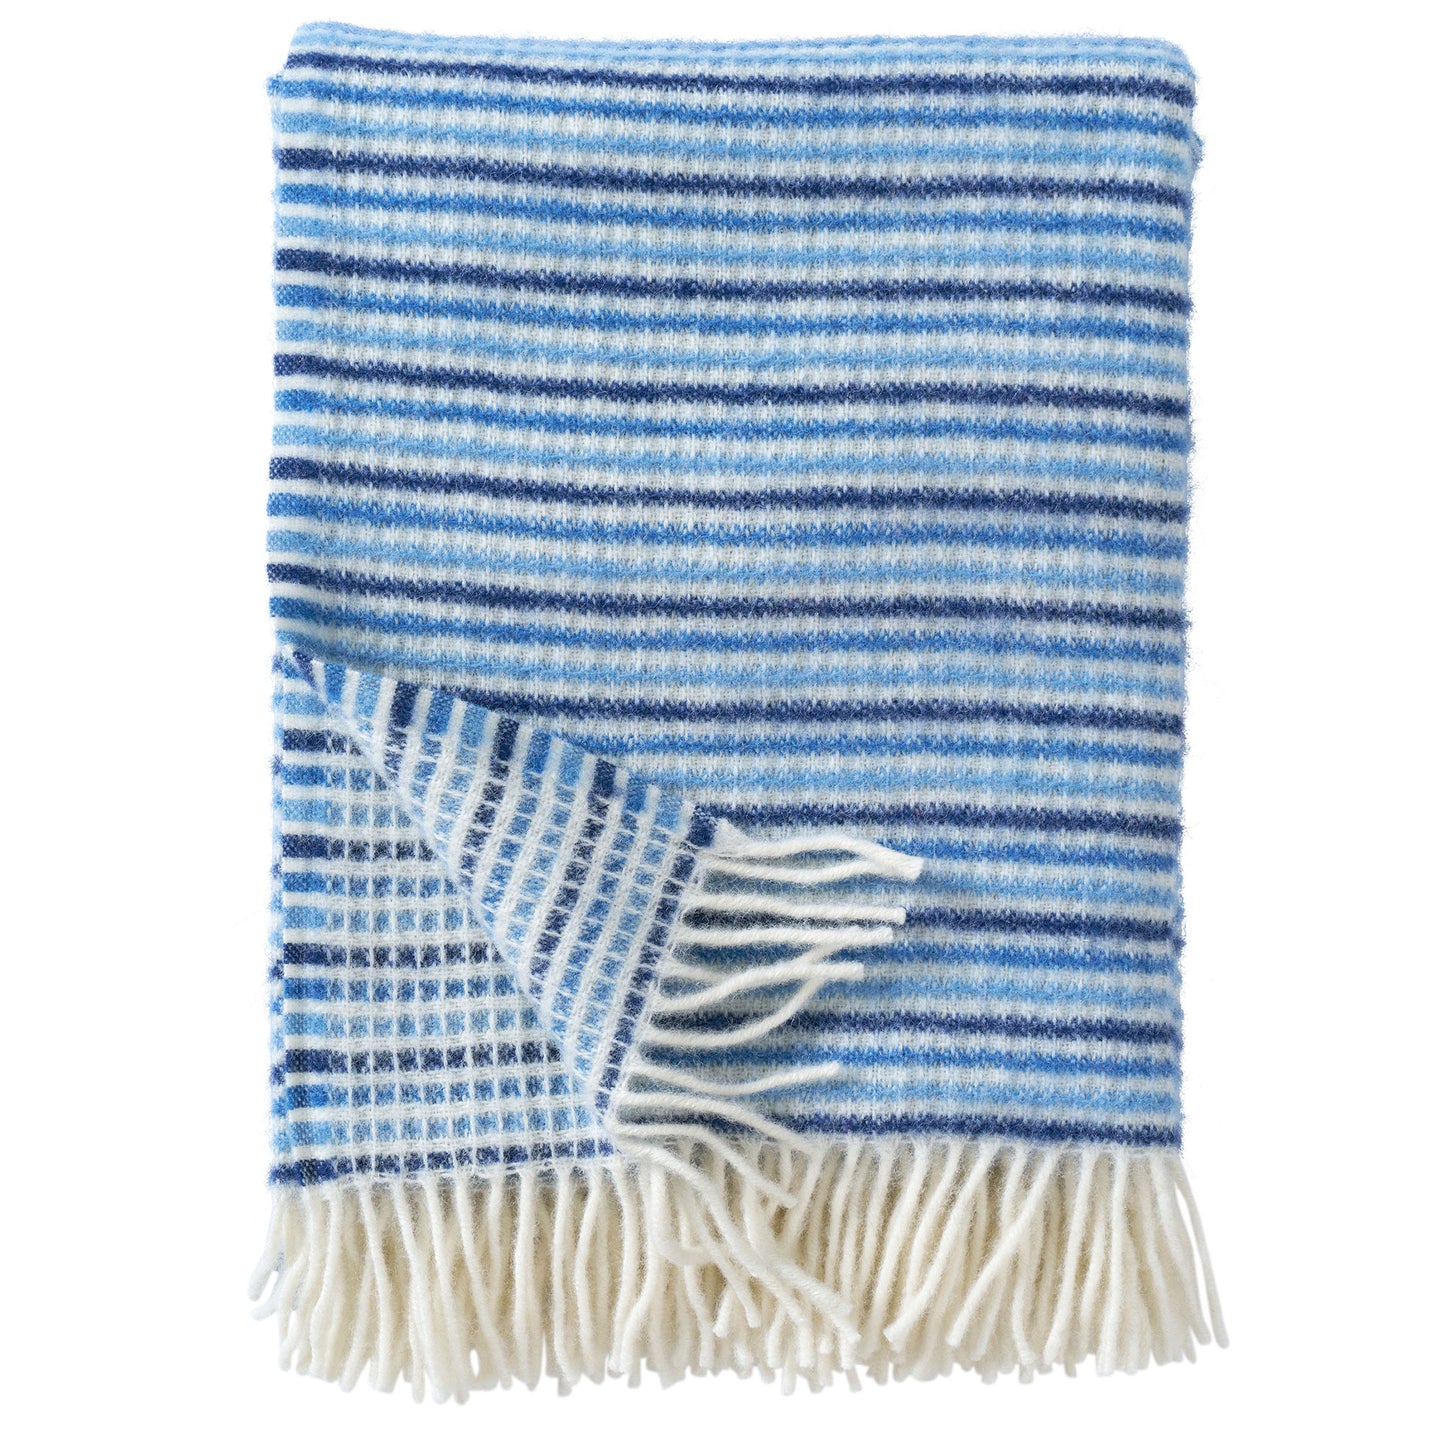 Tint Blue Brushed Lambswool Throw